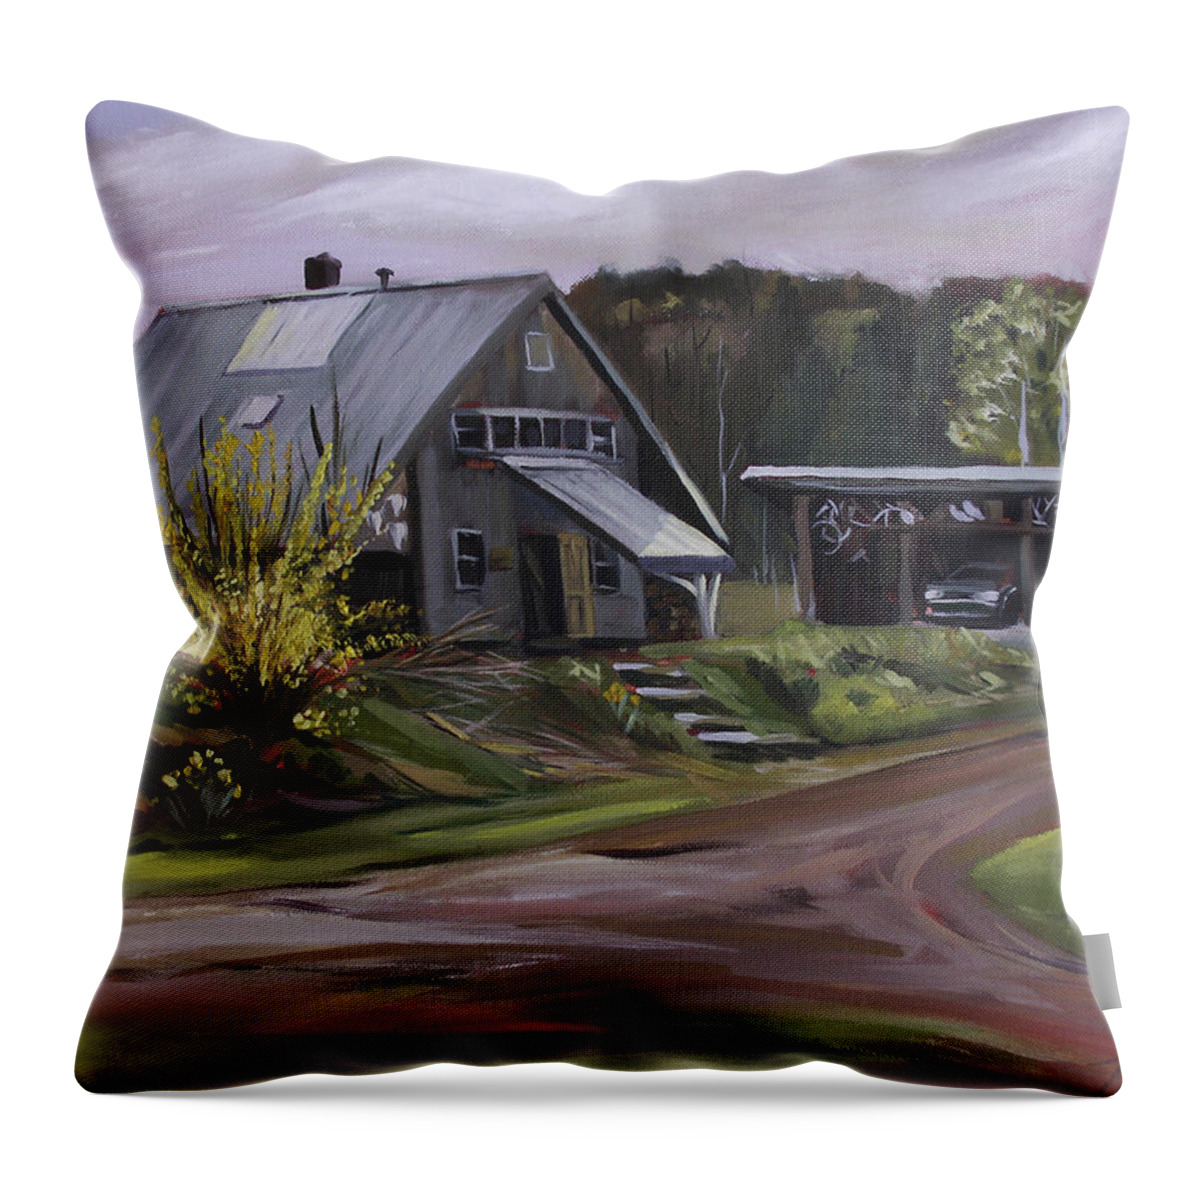 Spring Throw Pillow featuring the painting Humpals Barn by Nancy Griswold